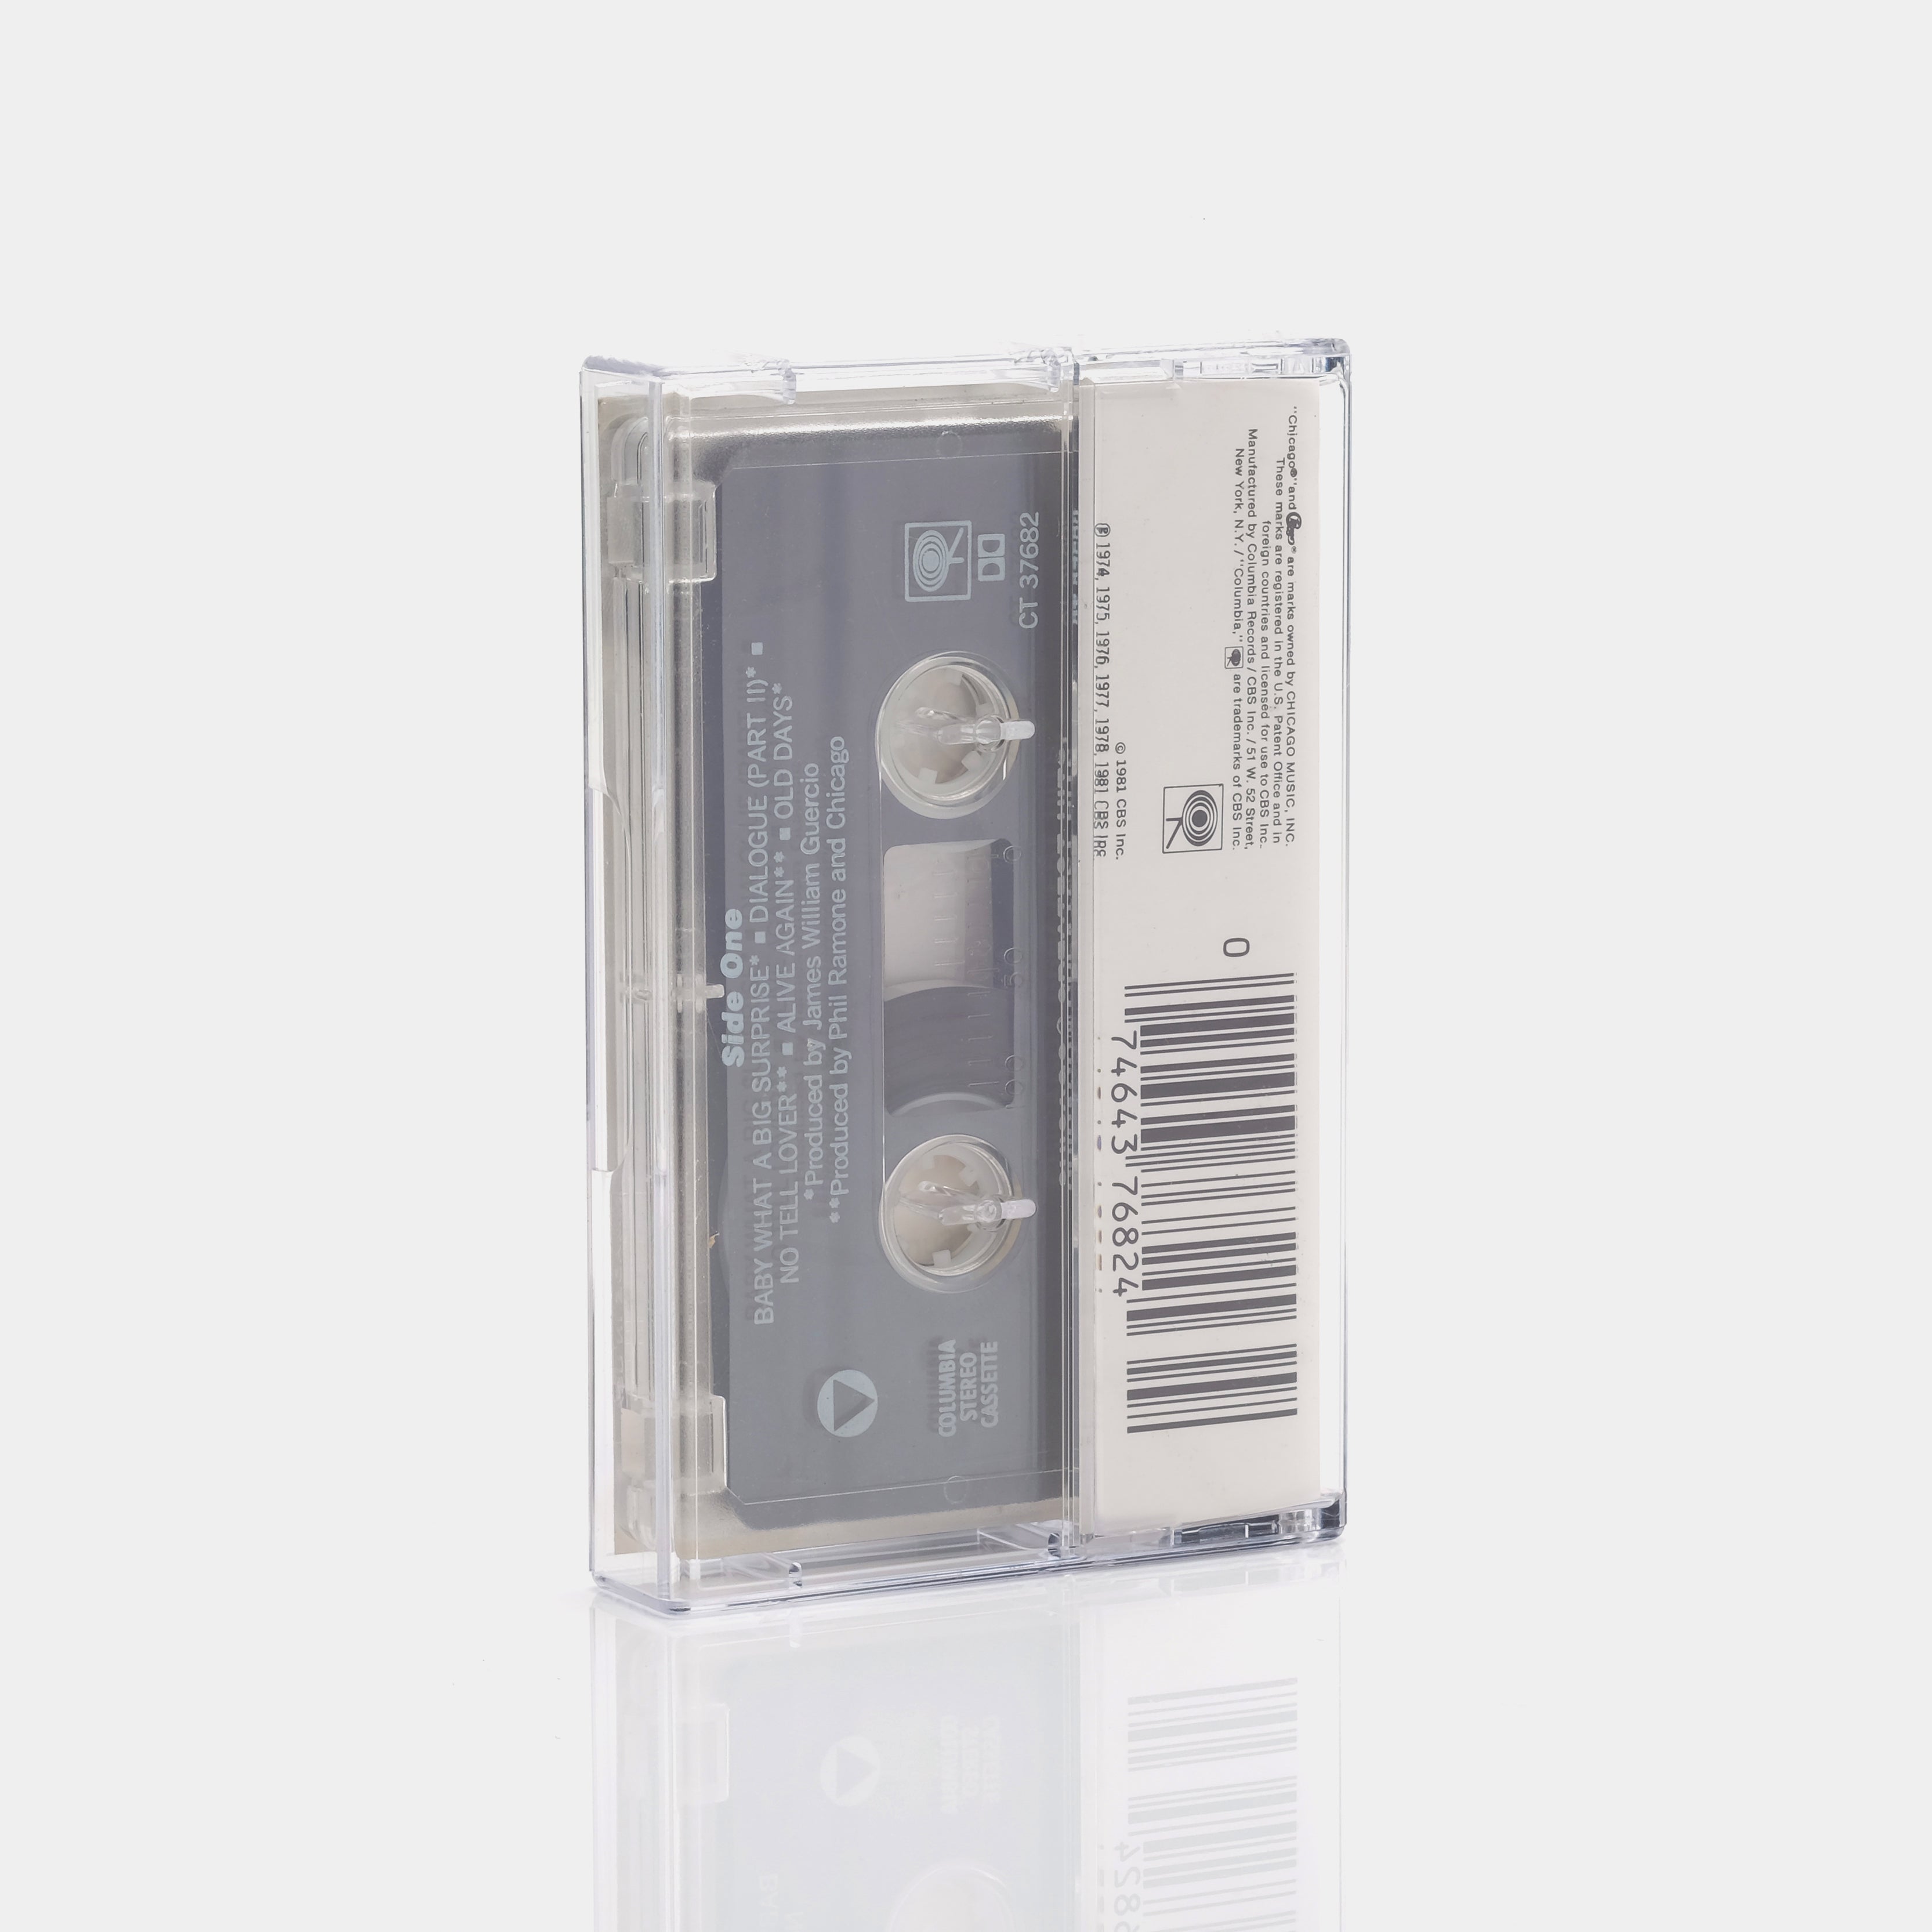 Chicago - Greatest Hits, Vol. II Cassette Tape